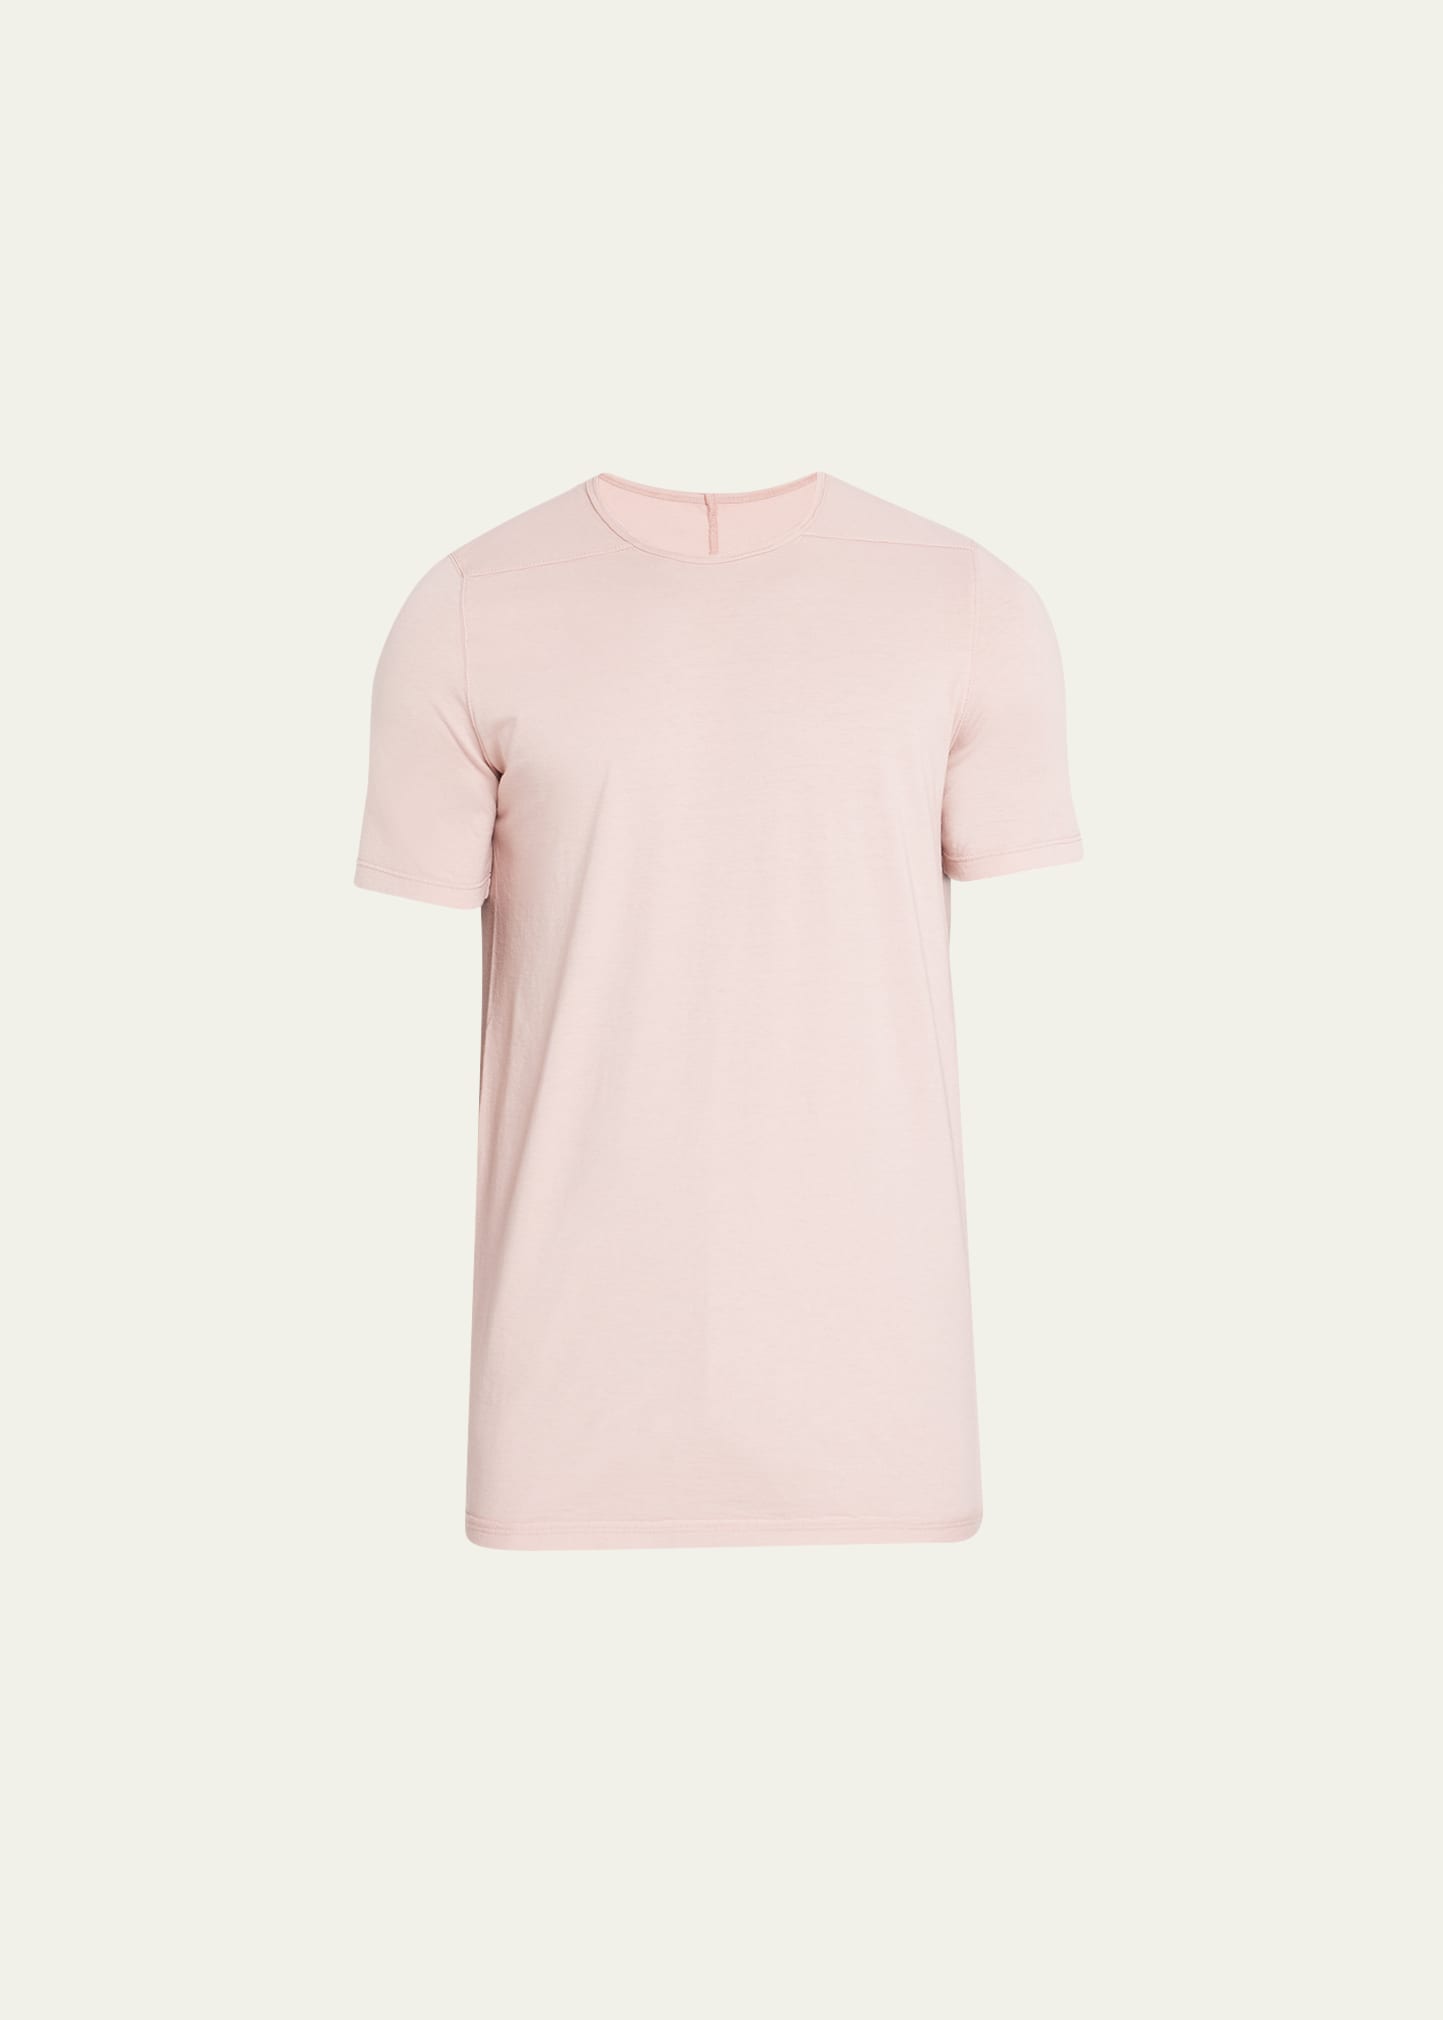 Drkshdw Rick Owens Men's Level Cotton Paneled T-shirt In Faded Pink